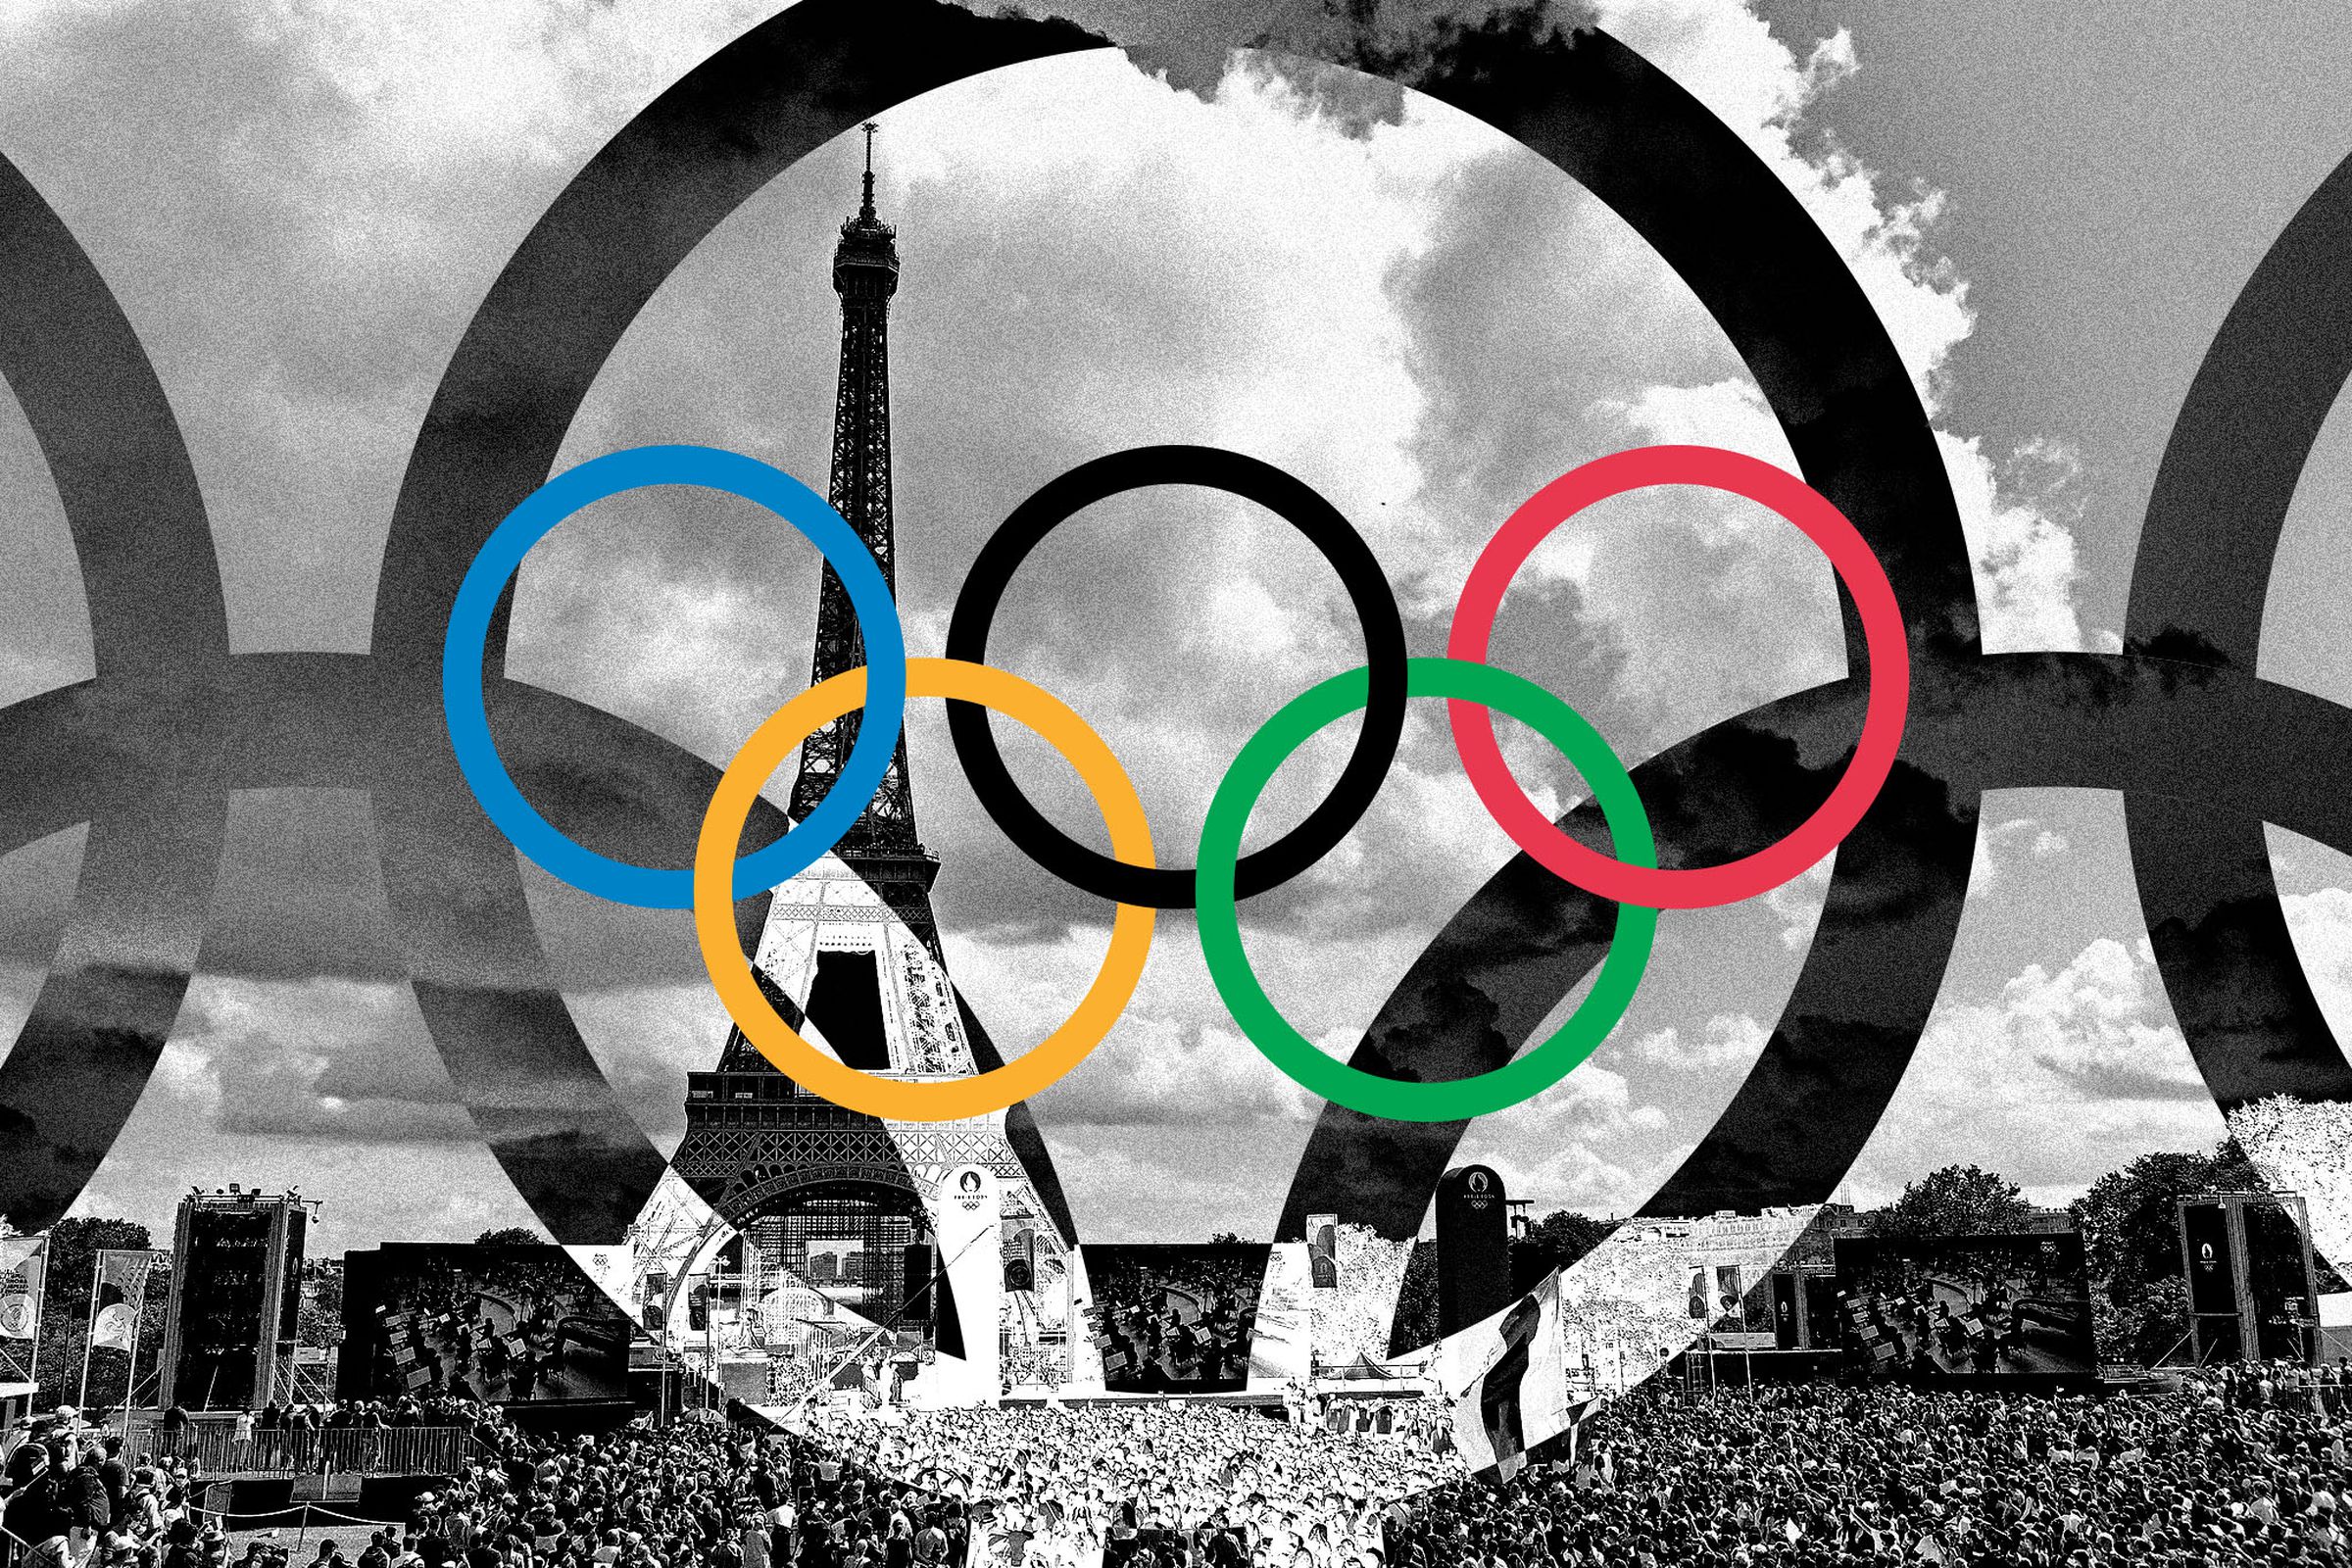 Photo collage of the Olympics rings over a photo of a Paris Olympics event.